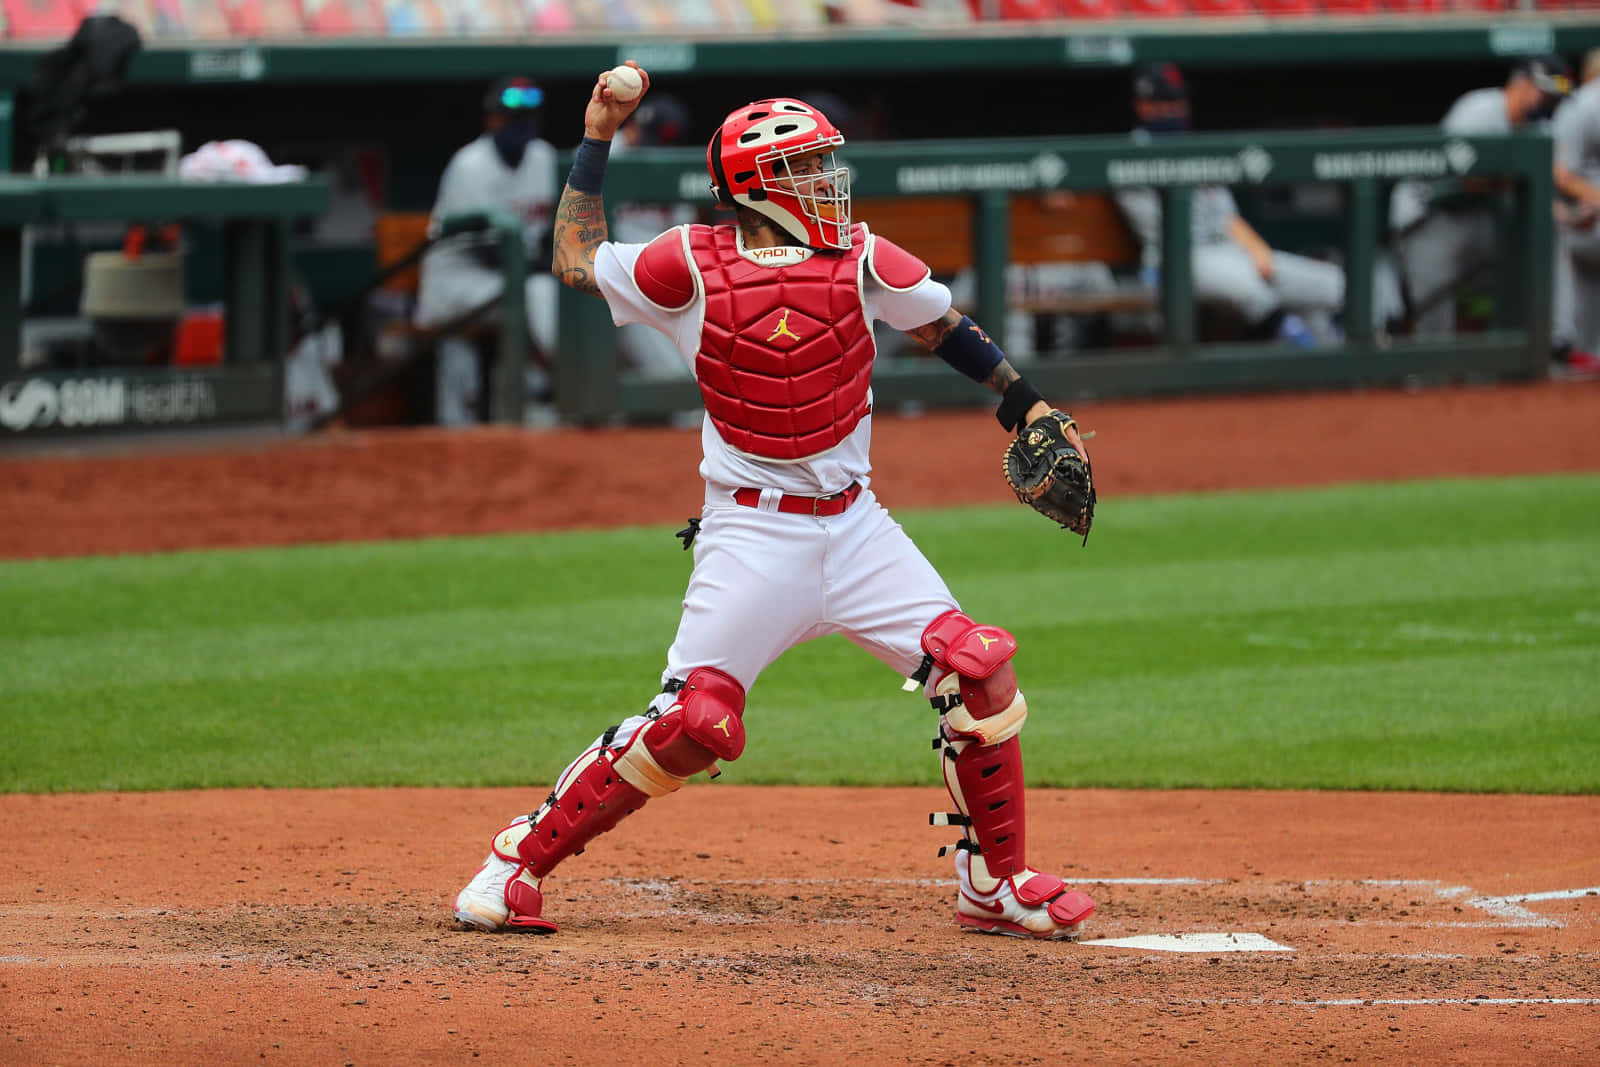 Download Yadier Molina, 9x All-Star catcher for the St. Louis